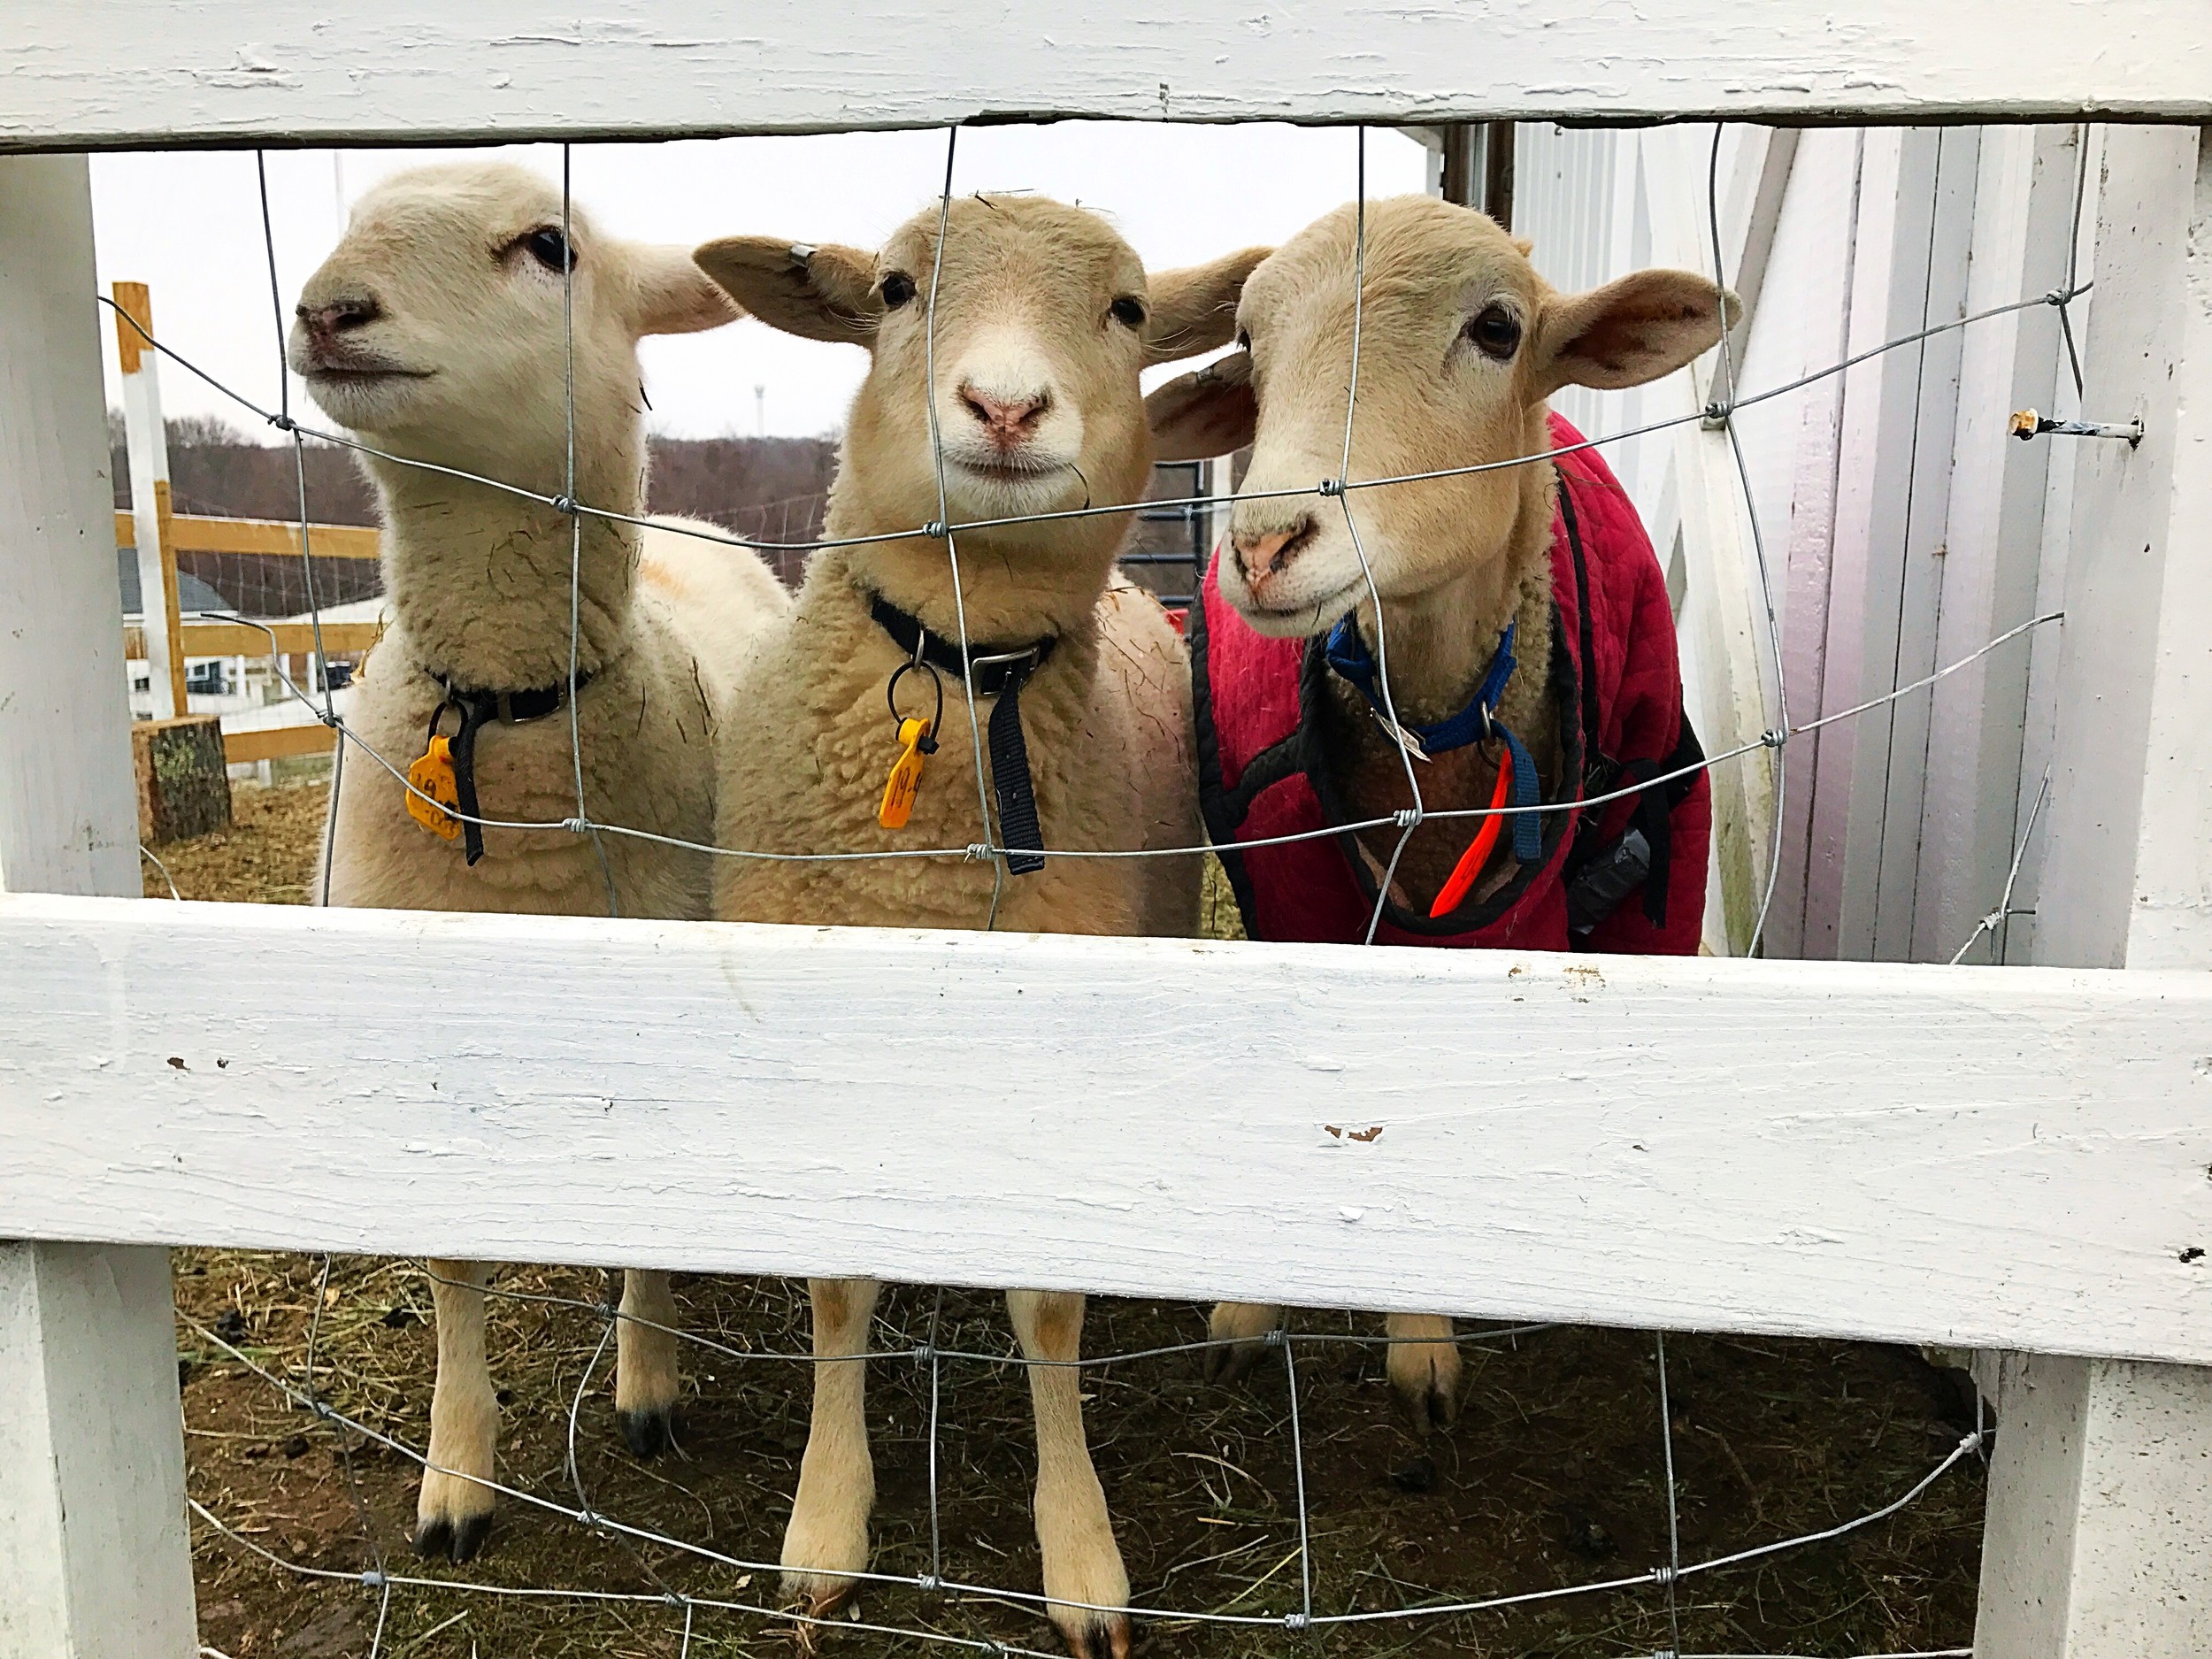 A trio of sheep, refugees of the Westport animal cruelty case, are decked out for the holidays at West Place Animal Sanctuary last December.